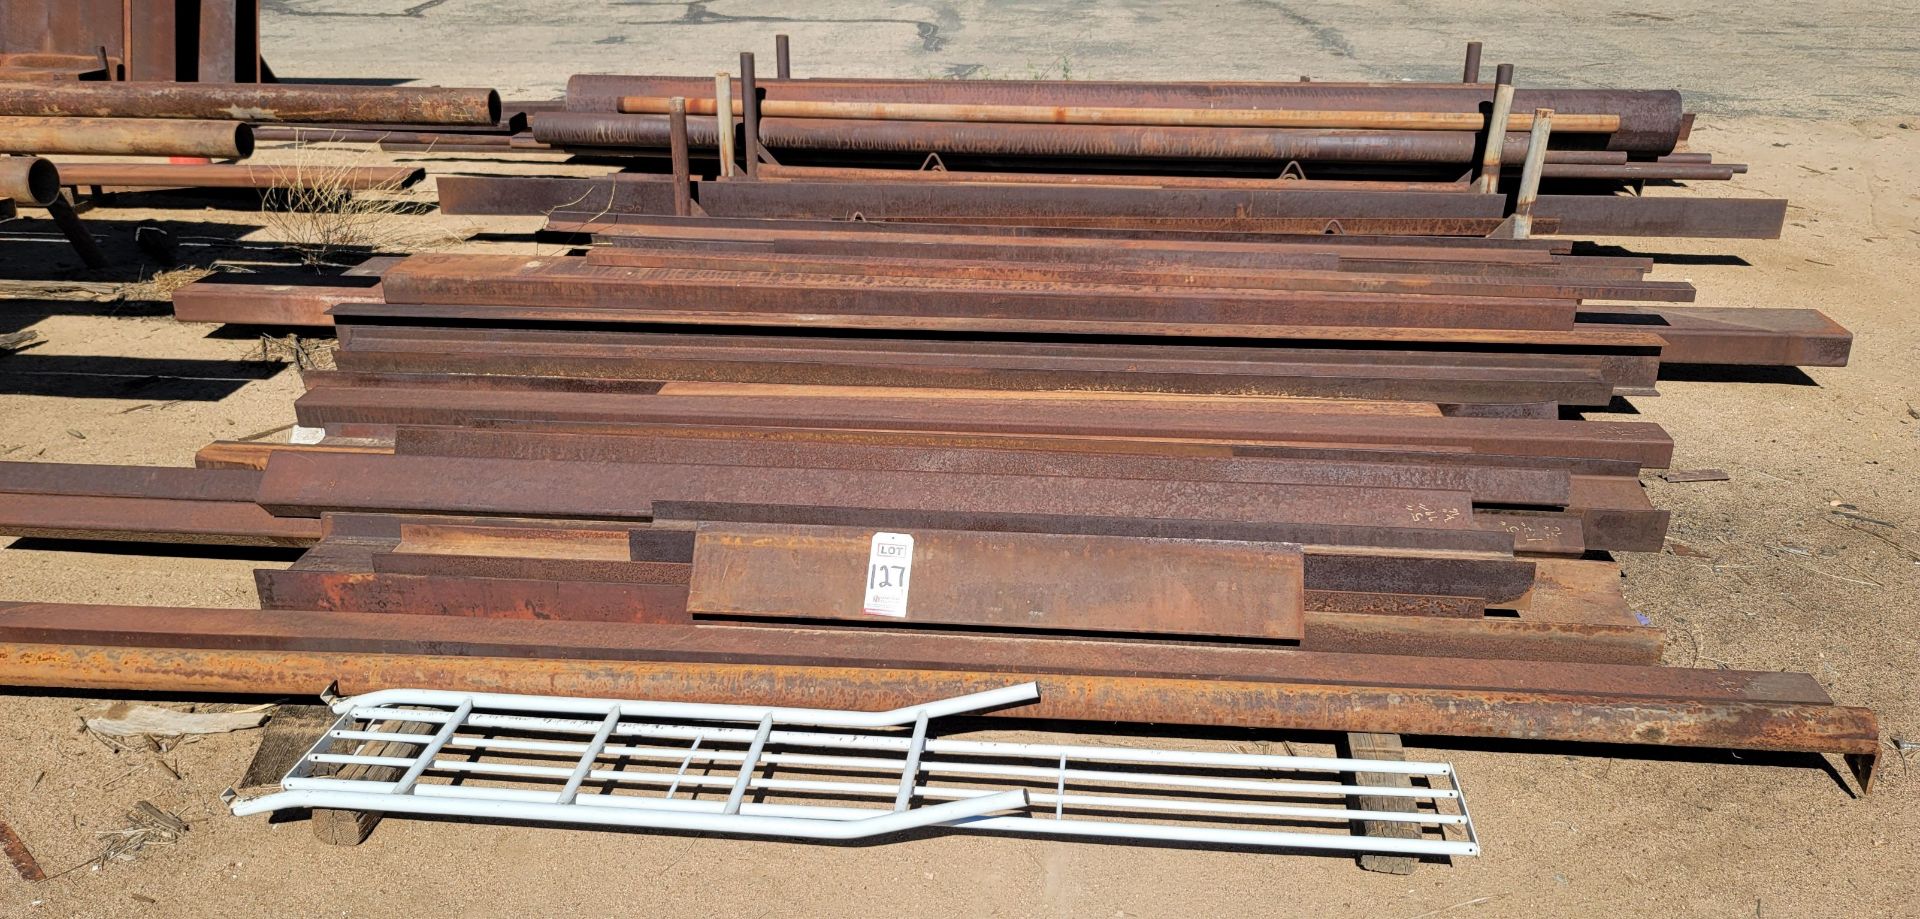 LOT - STRUCTURAL STEEL/PIPE, LENGTHS UP TO 18'